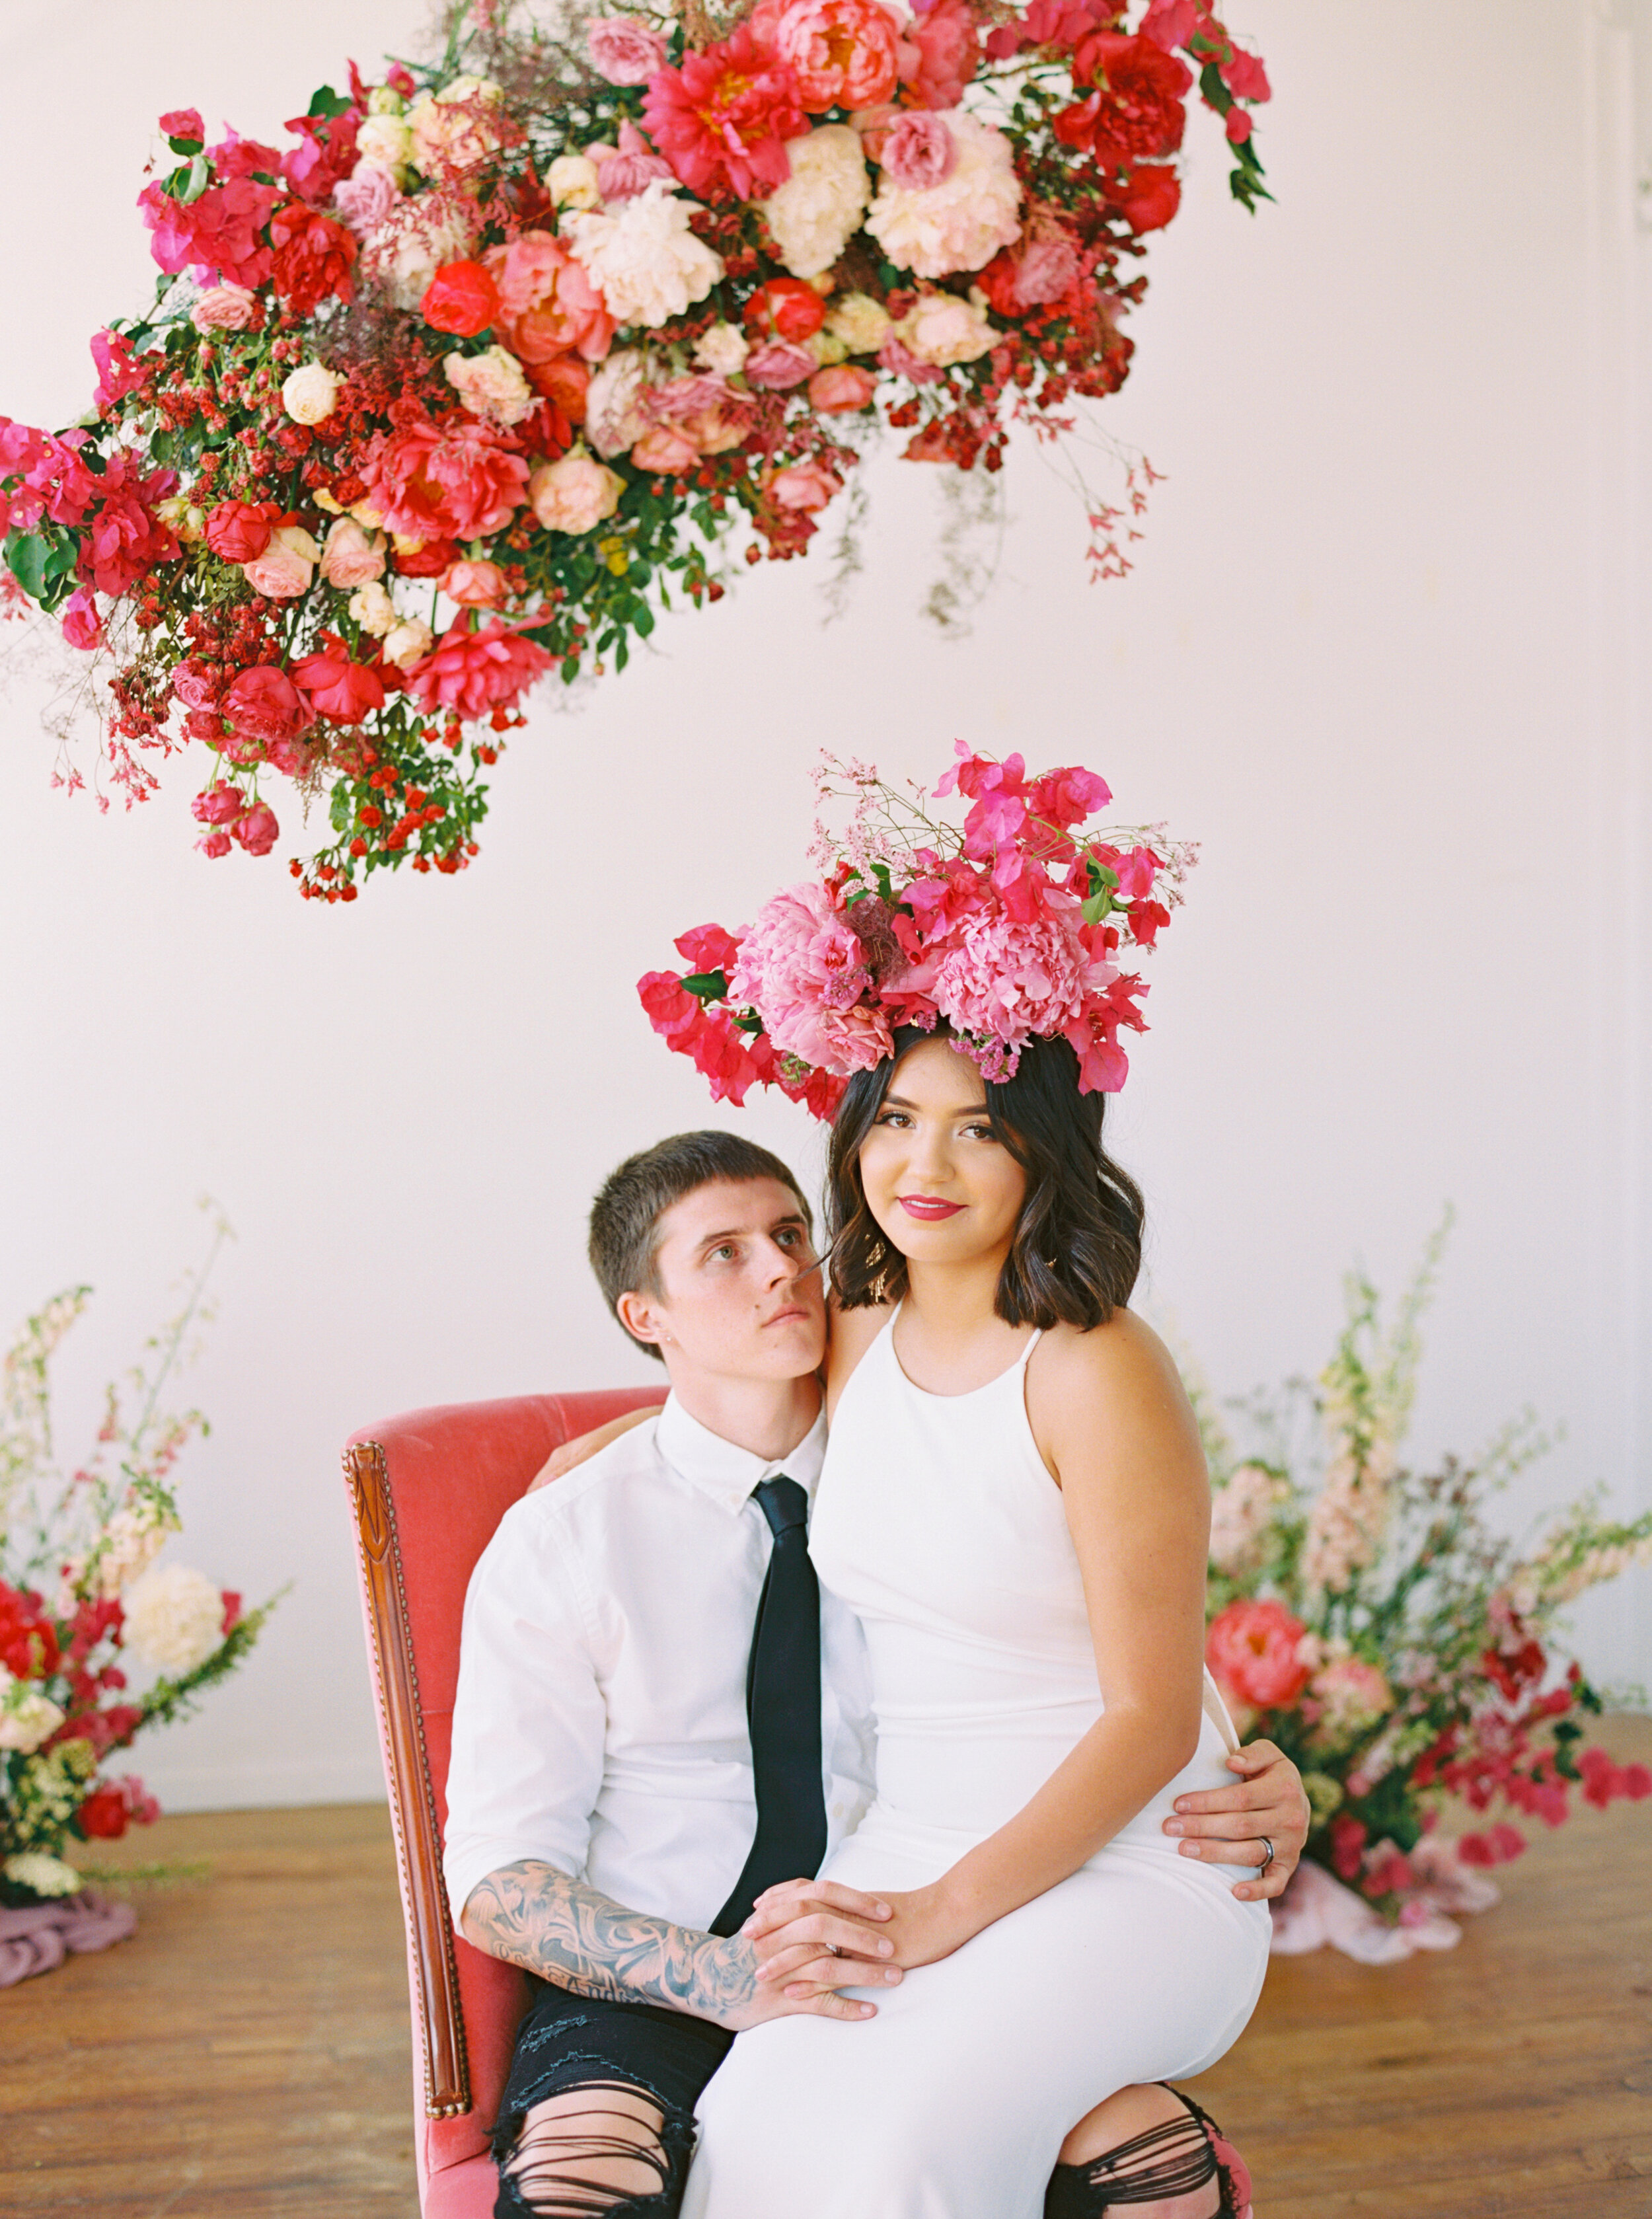 A Romantic Wedding Elopement Filled with Colorful Fuchsia - Sarahi Hadden Submission-15.jpg